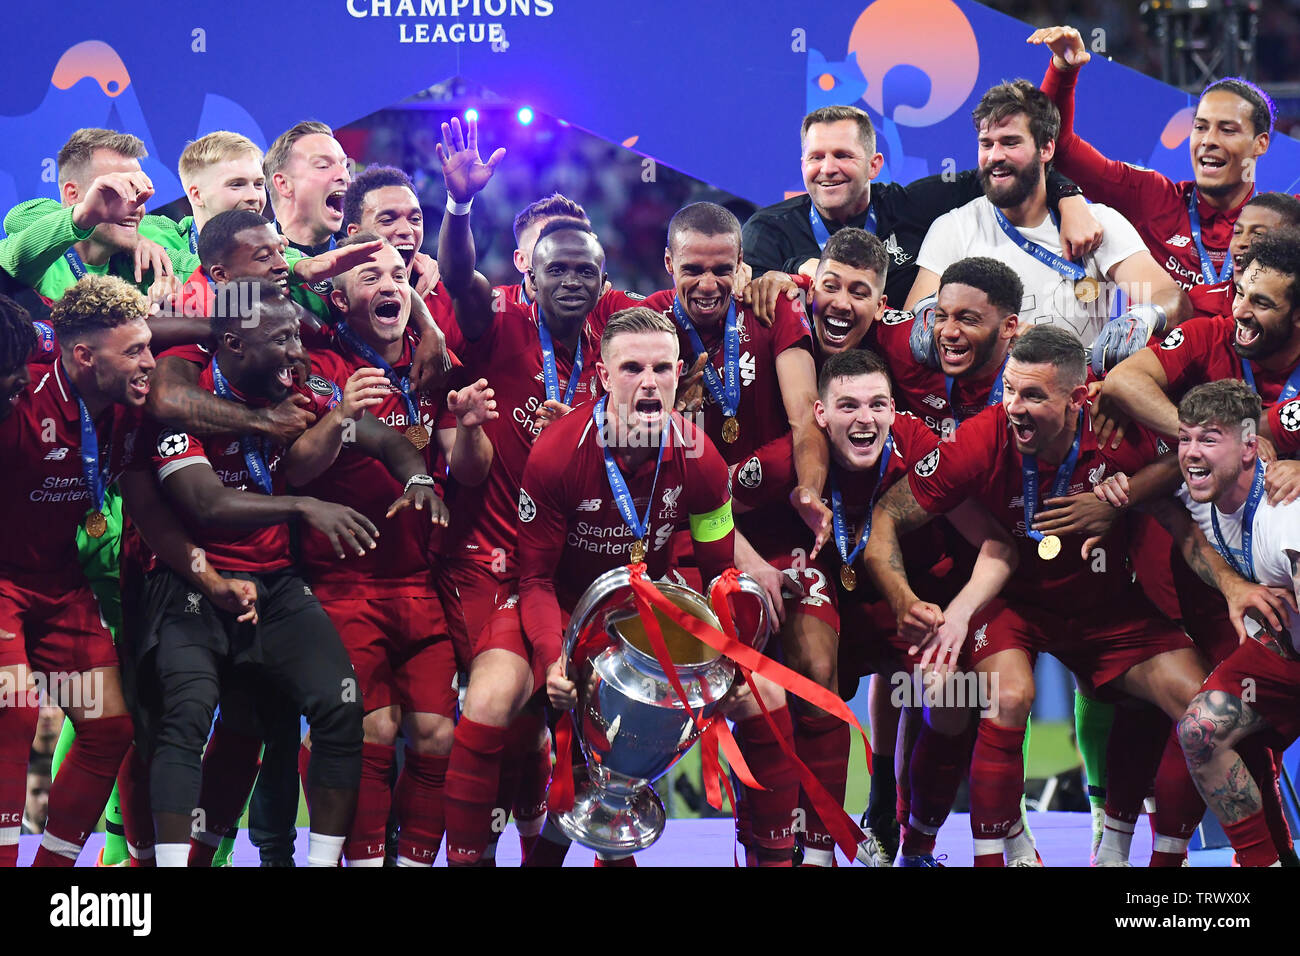 MADRID, SPAIN - JUNE 1, 2019: Jordan Henderson of Liverpool lifts the  trophy during the award ceremony held after the 2018/19 UEFA Champions  League Final between Tottenham Hotspur (England) and Liverpool FC (